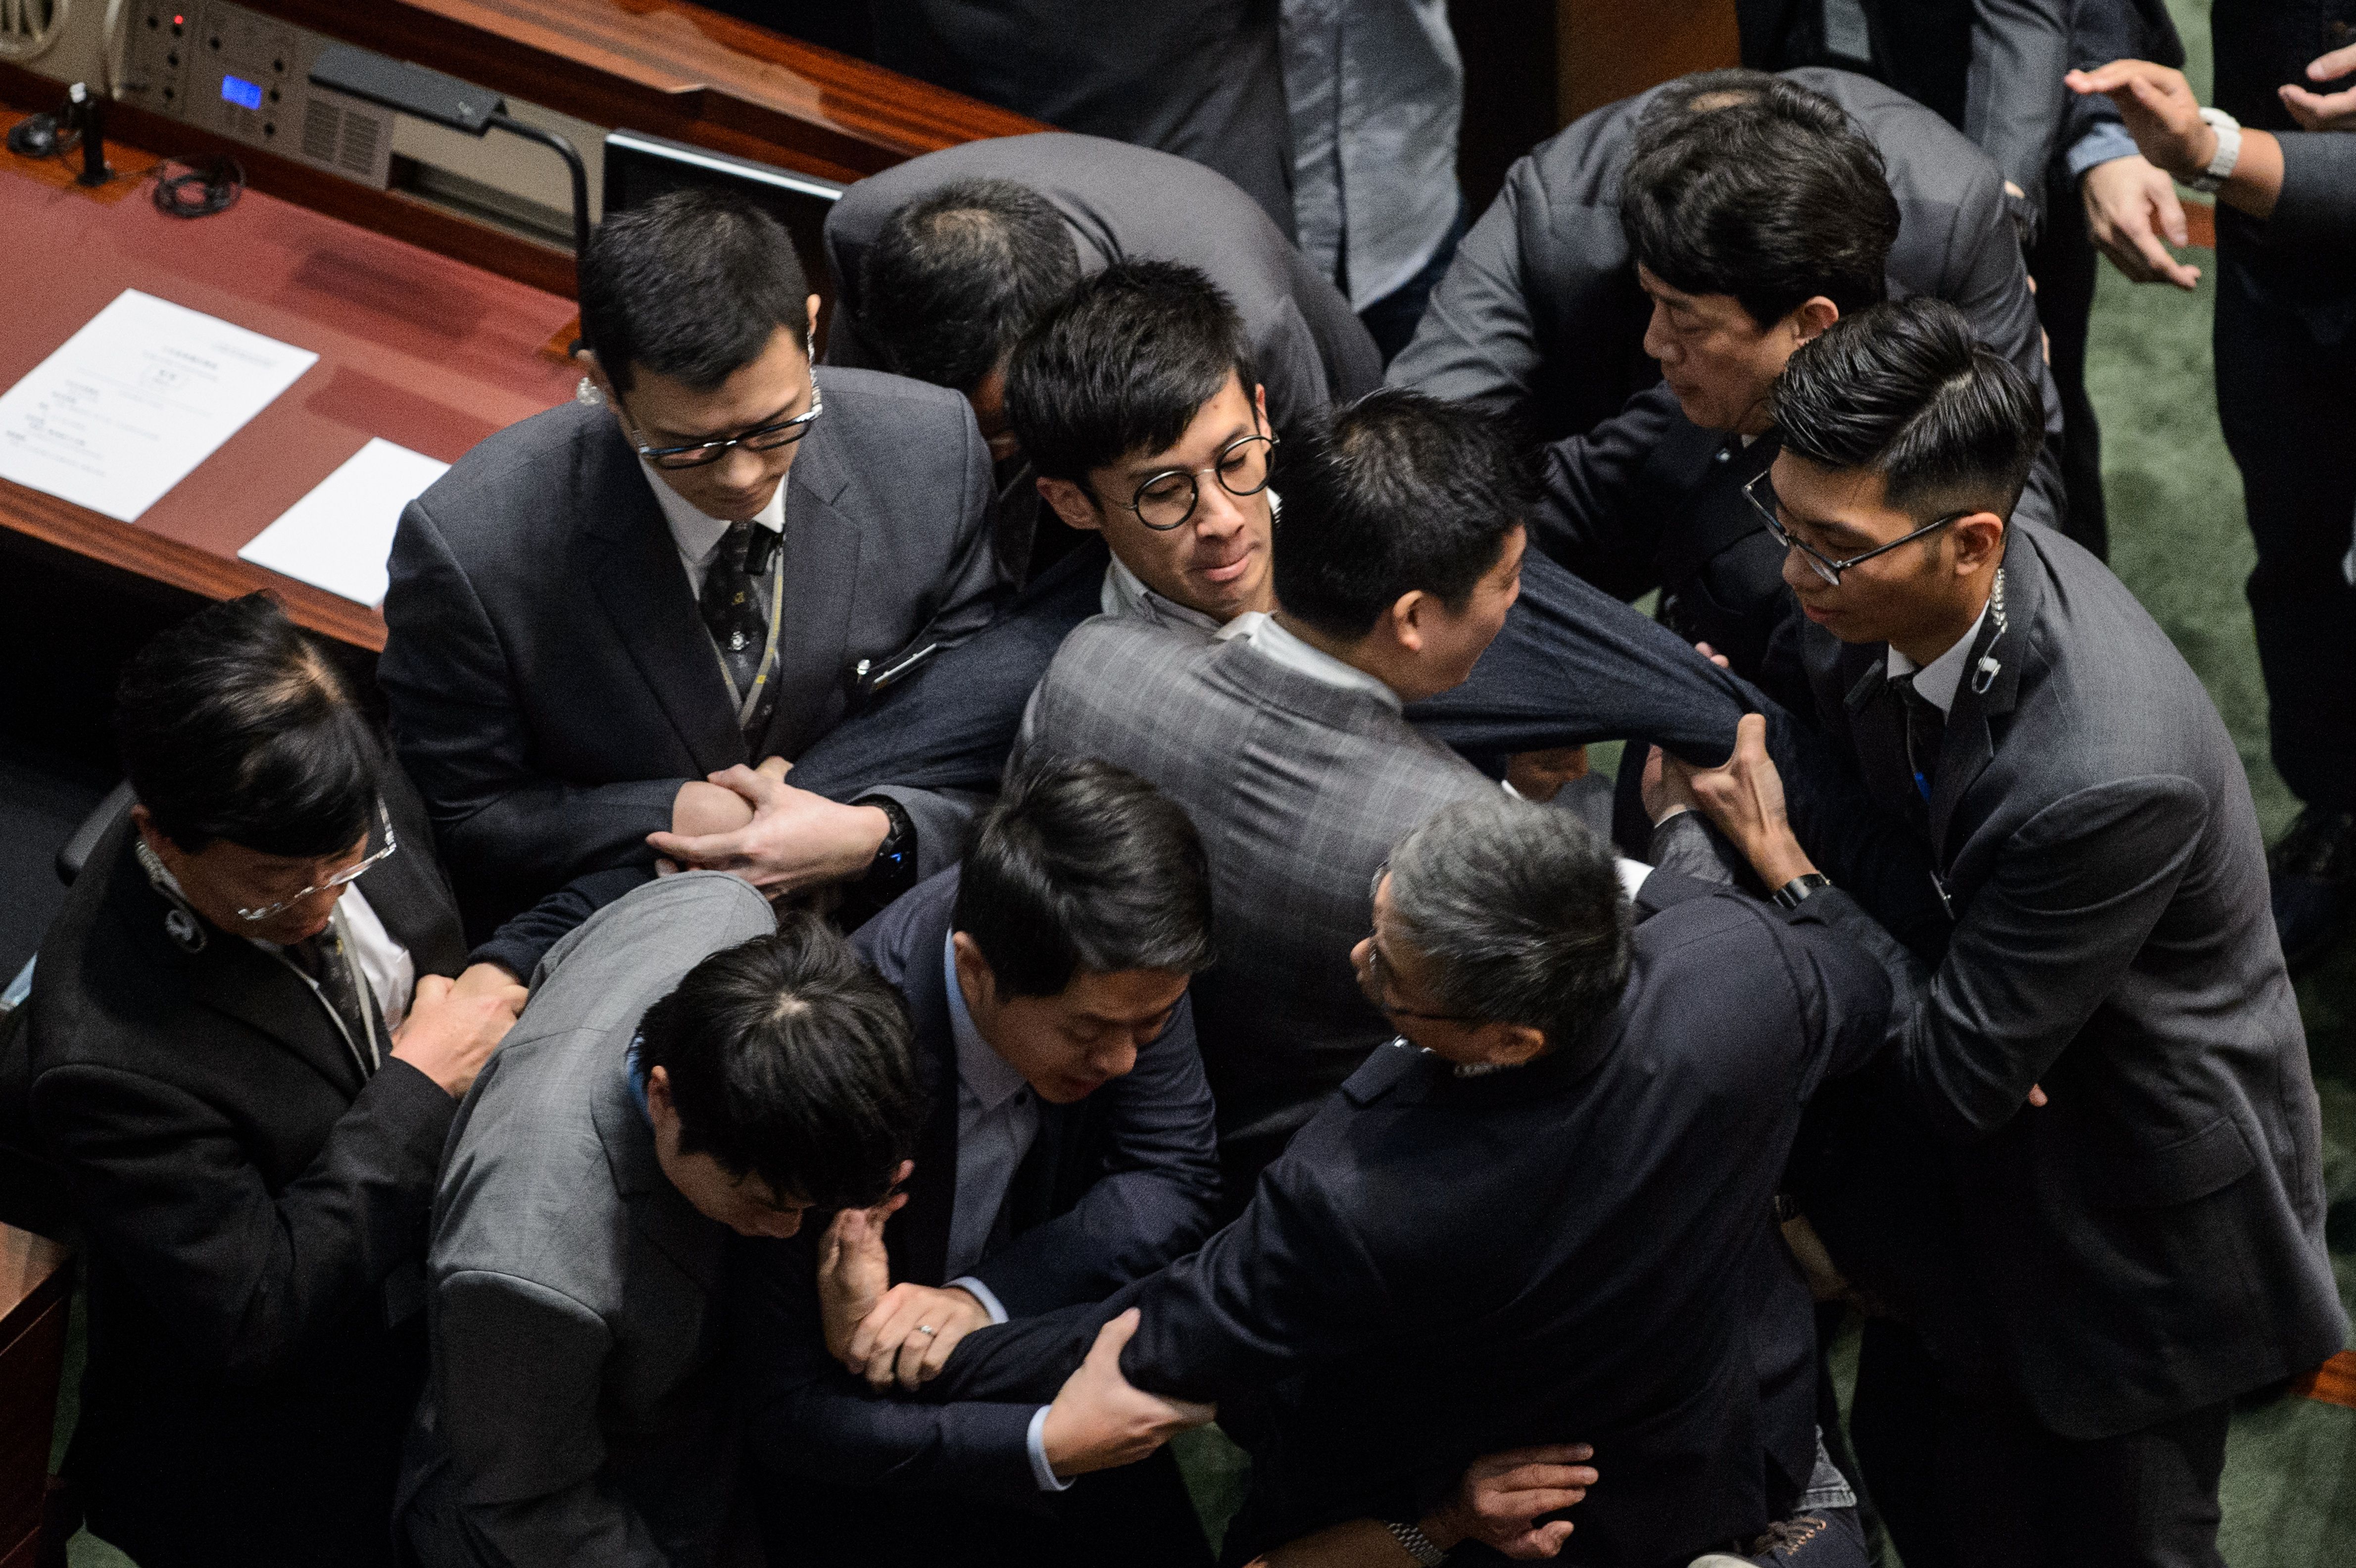 Newly elected lawmaker Baggio Leung is restrained by security after attempting to read out his Legislative Council oath at Legislative Council in Hong Kong on Nov. 2, 2016 (Anthony Wallace—AFP/Getty Images)